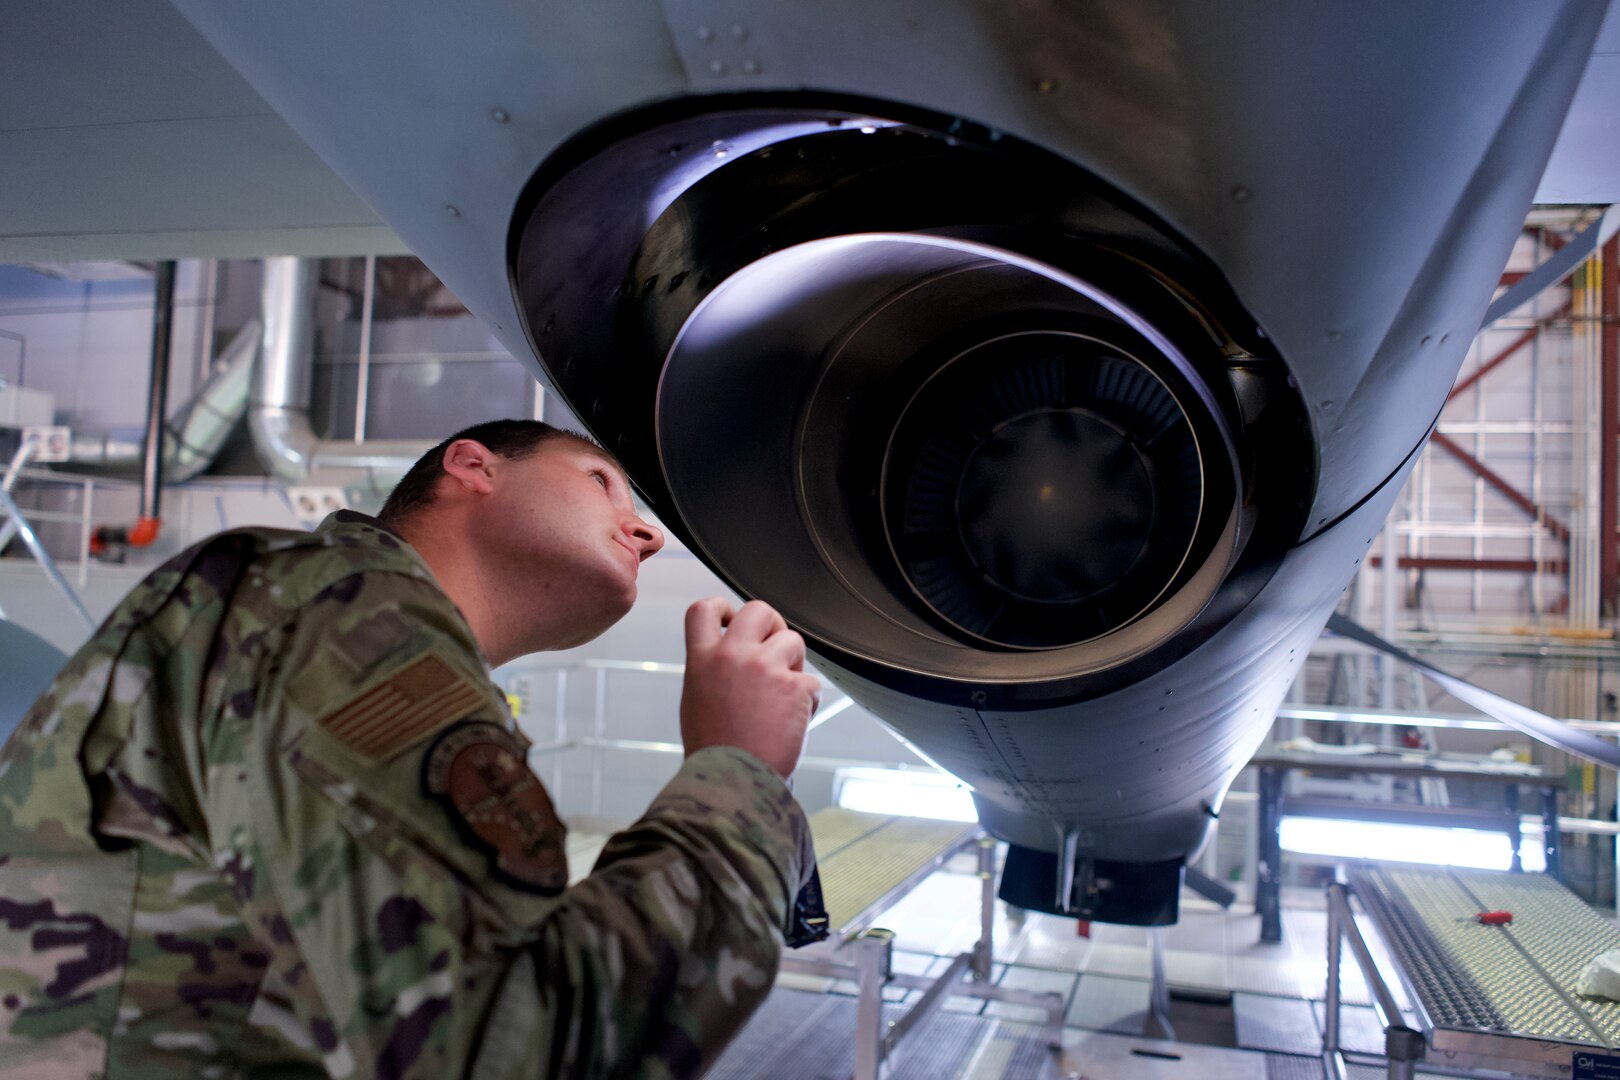 Alaska Air National Guard Airman 1st Class Brad Payton, an HC-130J Combat King II crew chief with 176th Aircraft Maintenance Squadron, inspects a 211th RQS HC-130 engine exhaust Oct. 4, 2021, at Joint Base Elmendorf-Richardson, Alaska. Payton recently completed mission-essential skills training following technical school and is pursuing a civilian career in aviation maintenance.